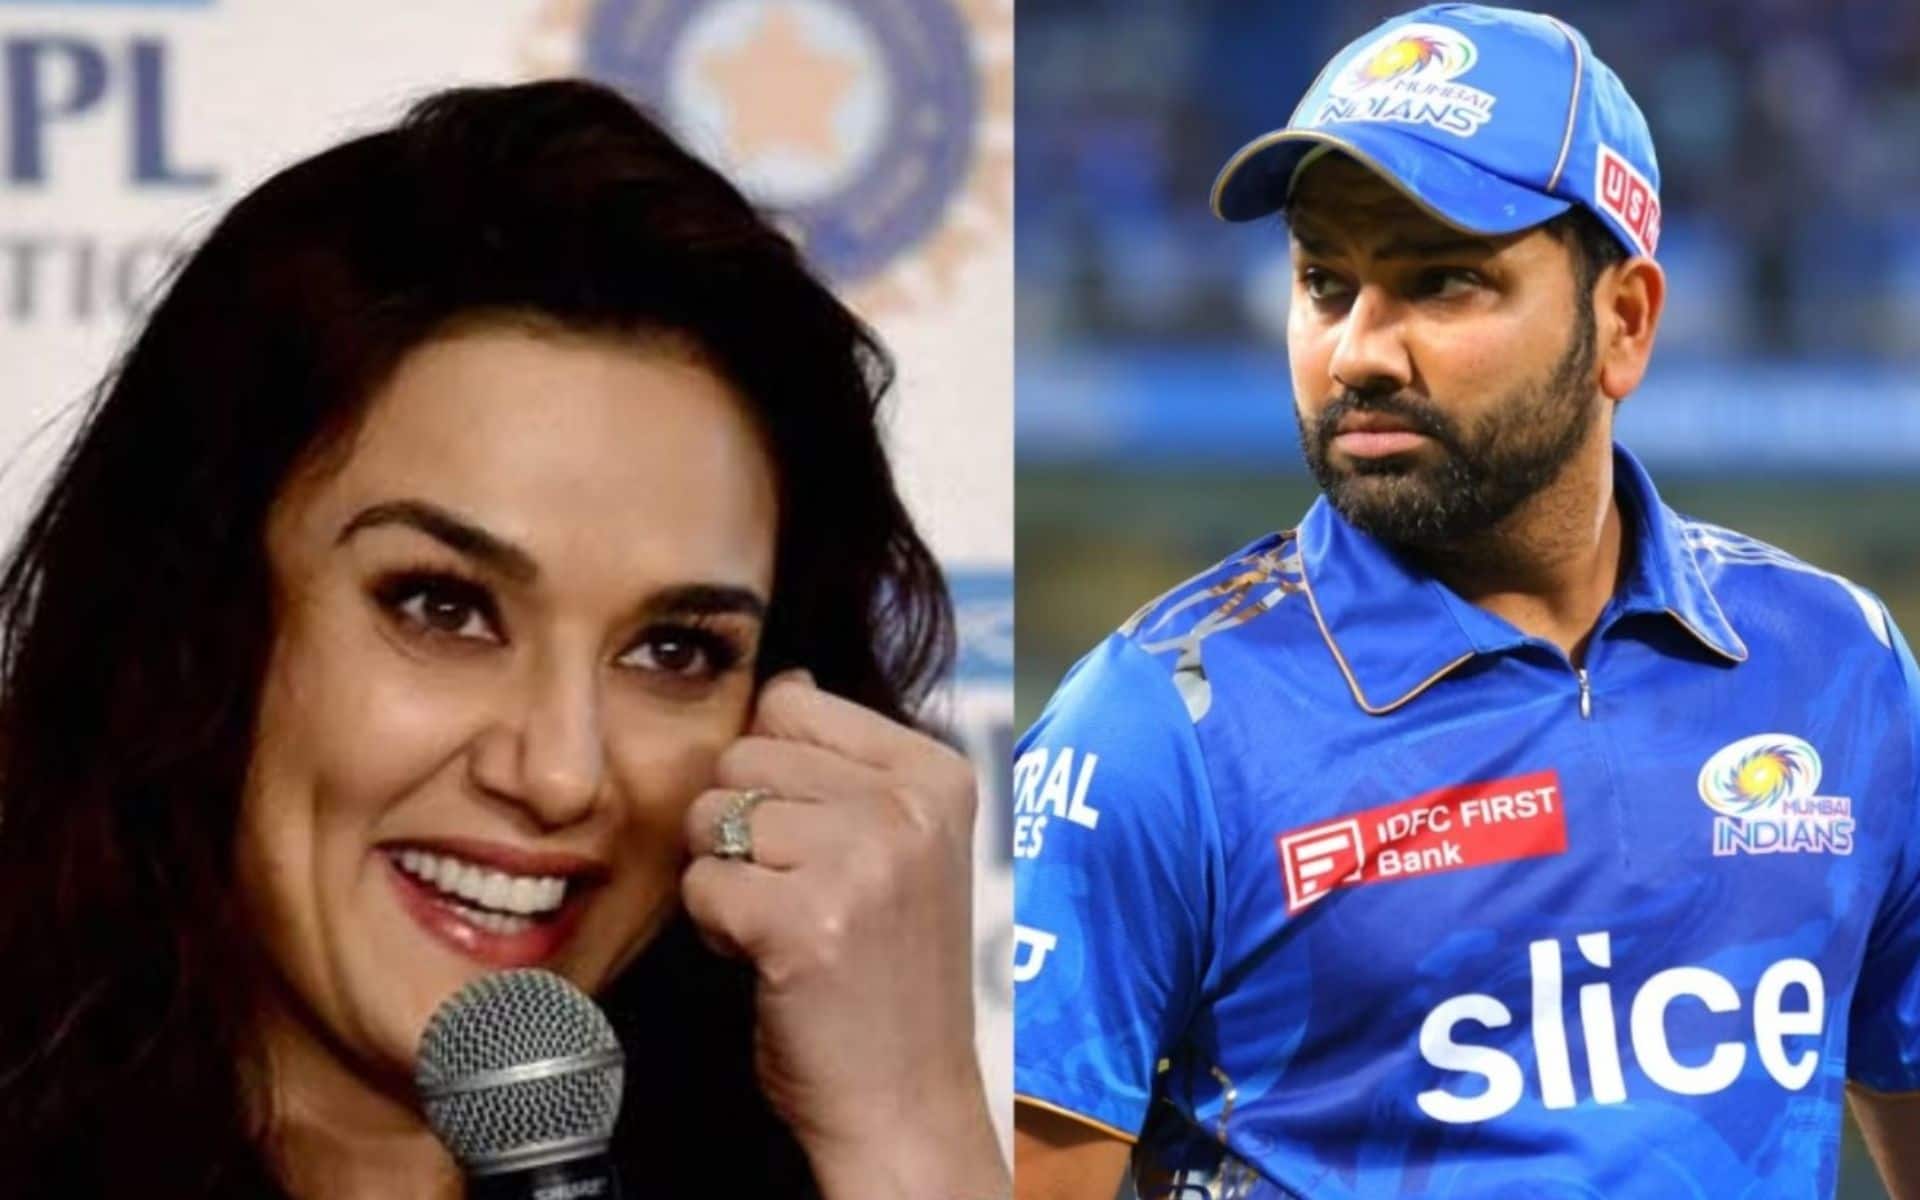 Preity Zinta Compliments Rohit Sharma's Batting Prowess After Alleged 'Will Bet My Life' Rumour